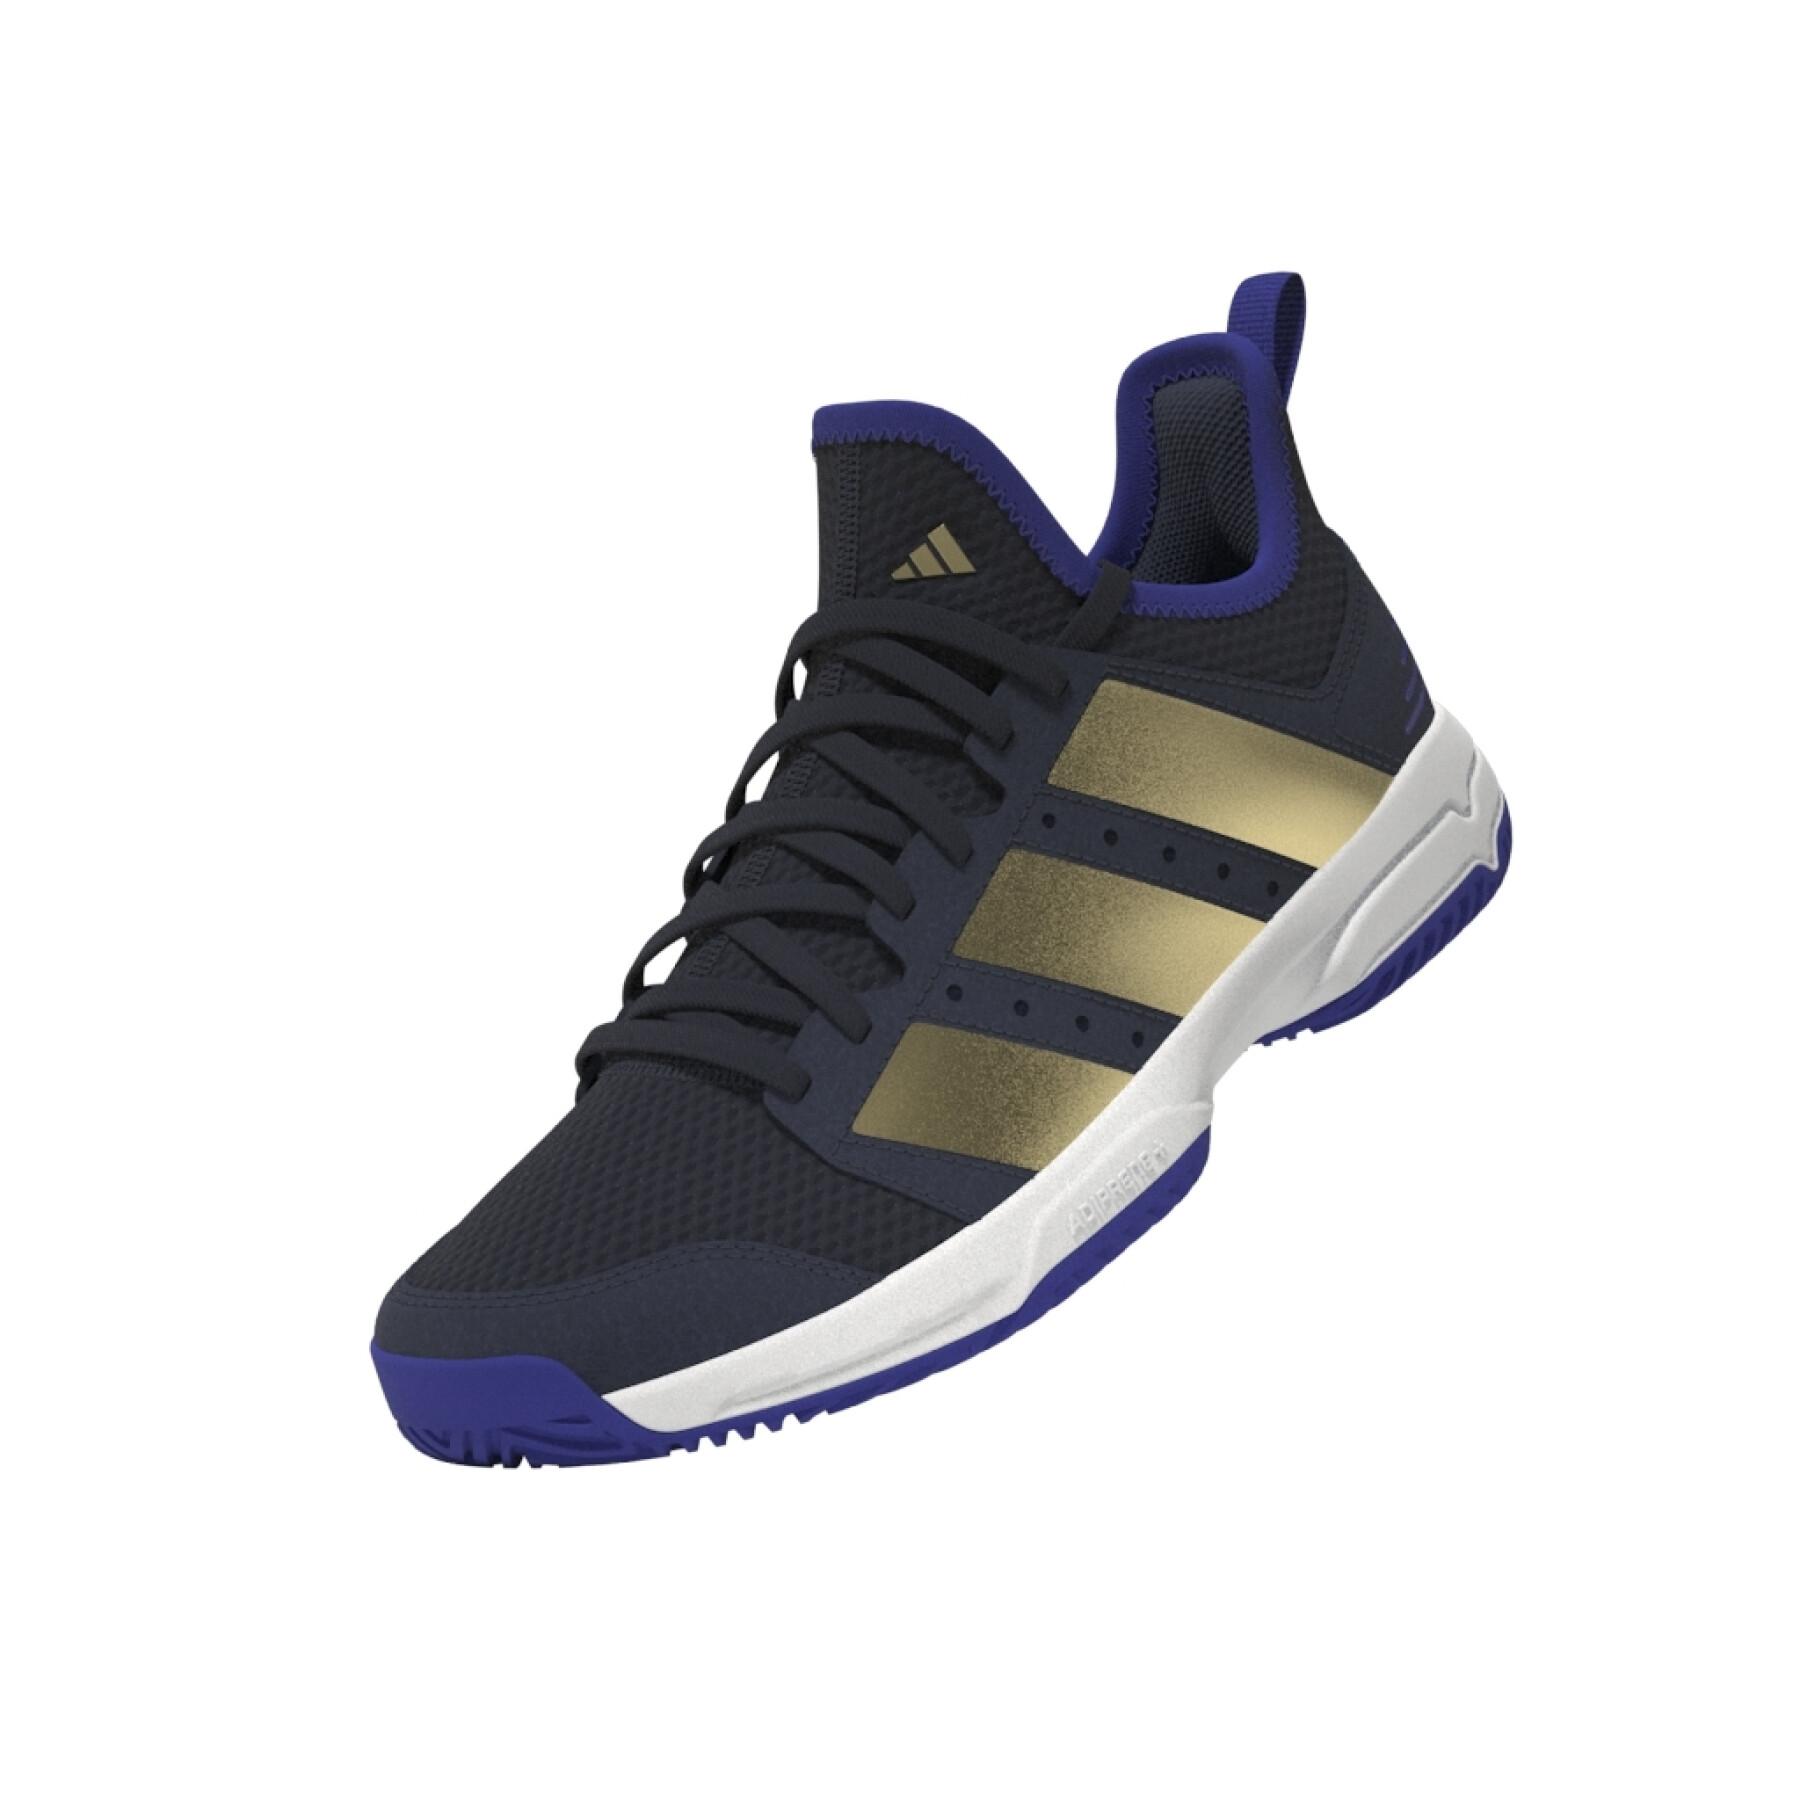 Shoes indoor child adidas Stabil